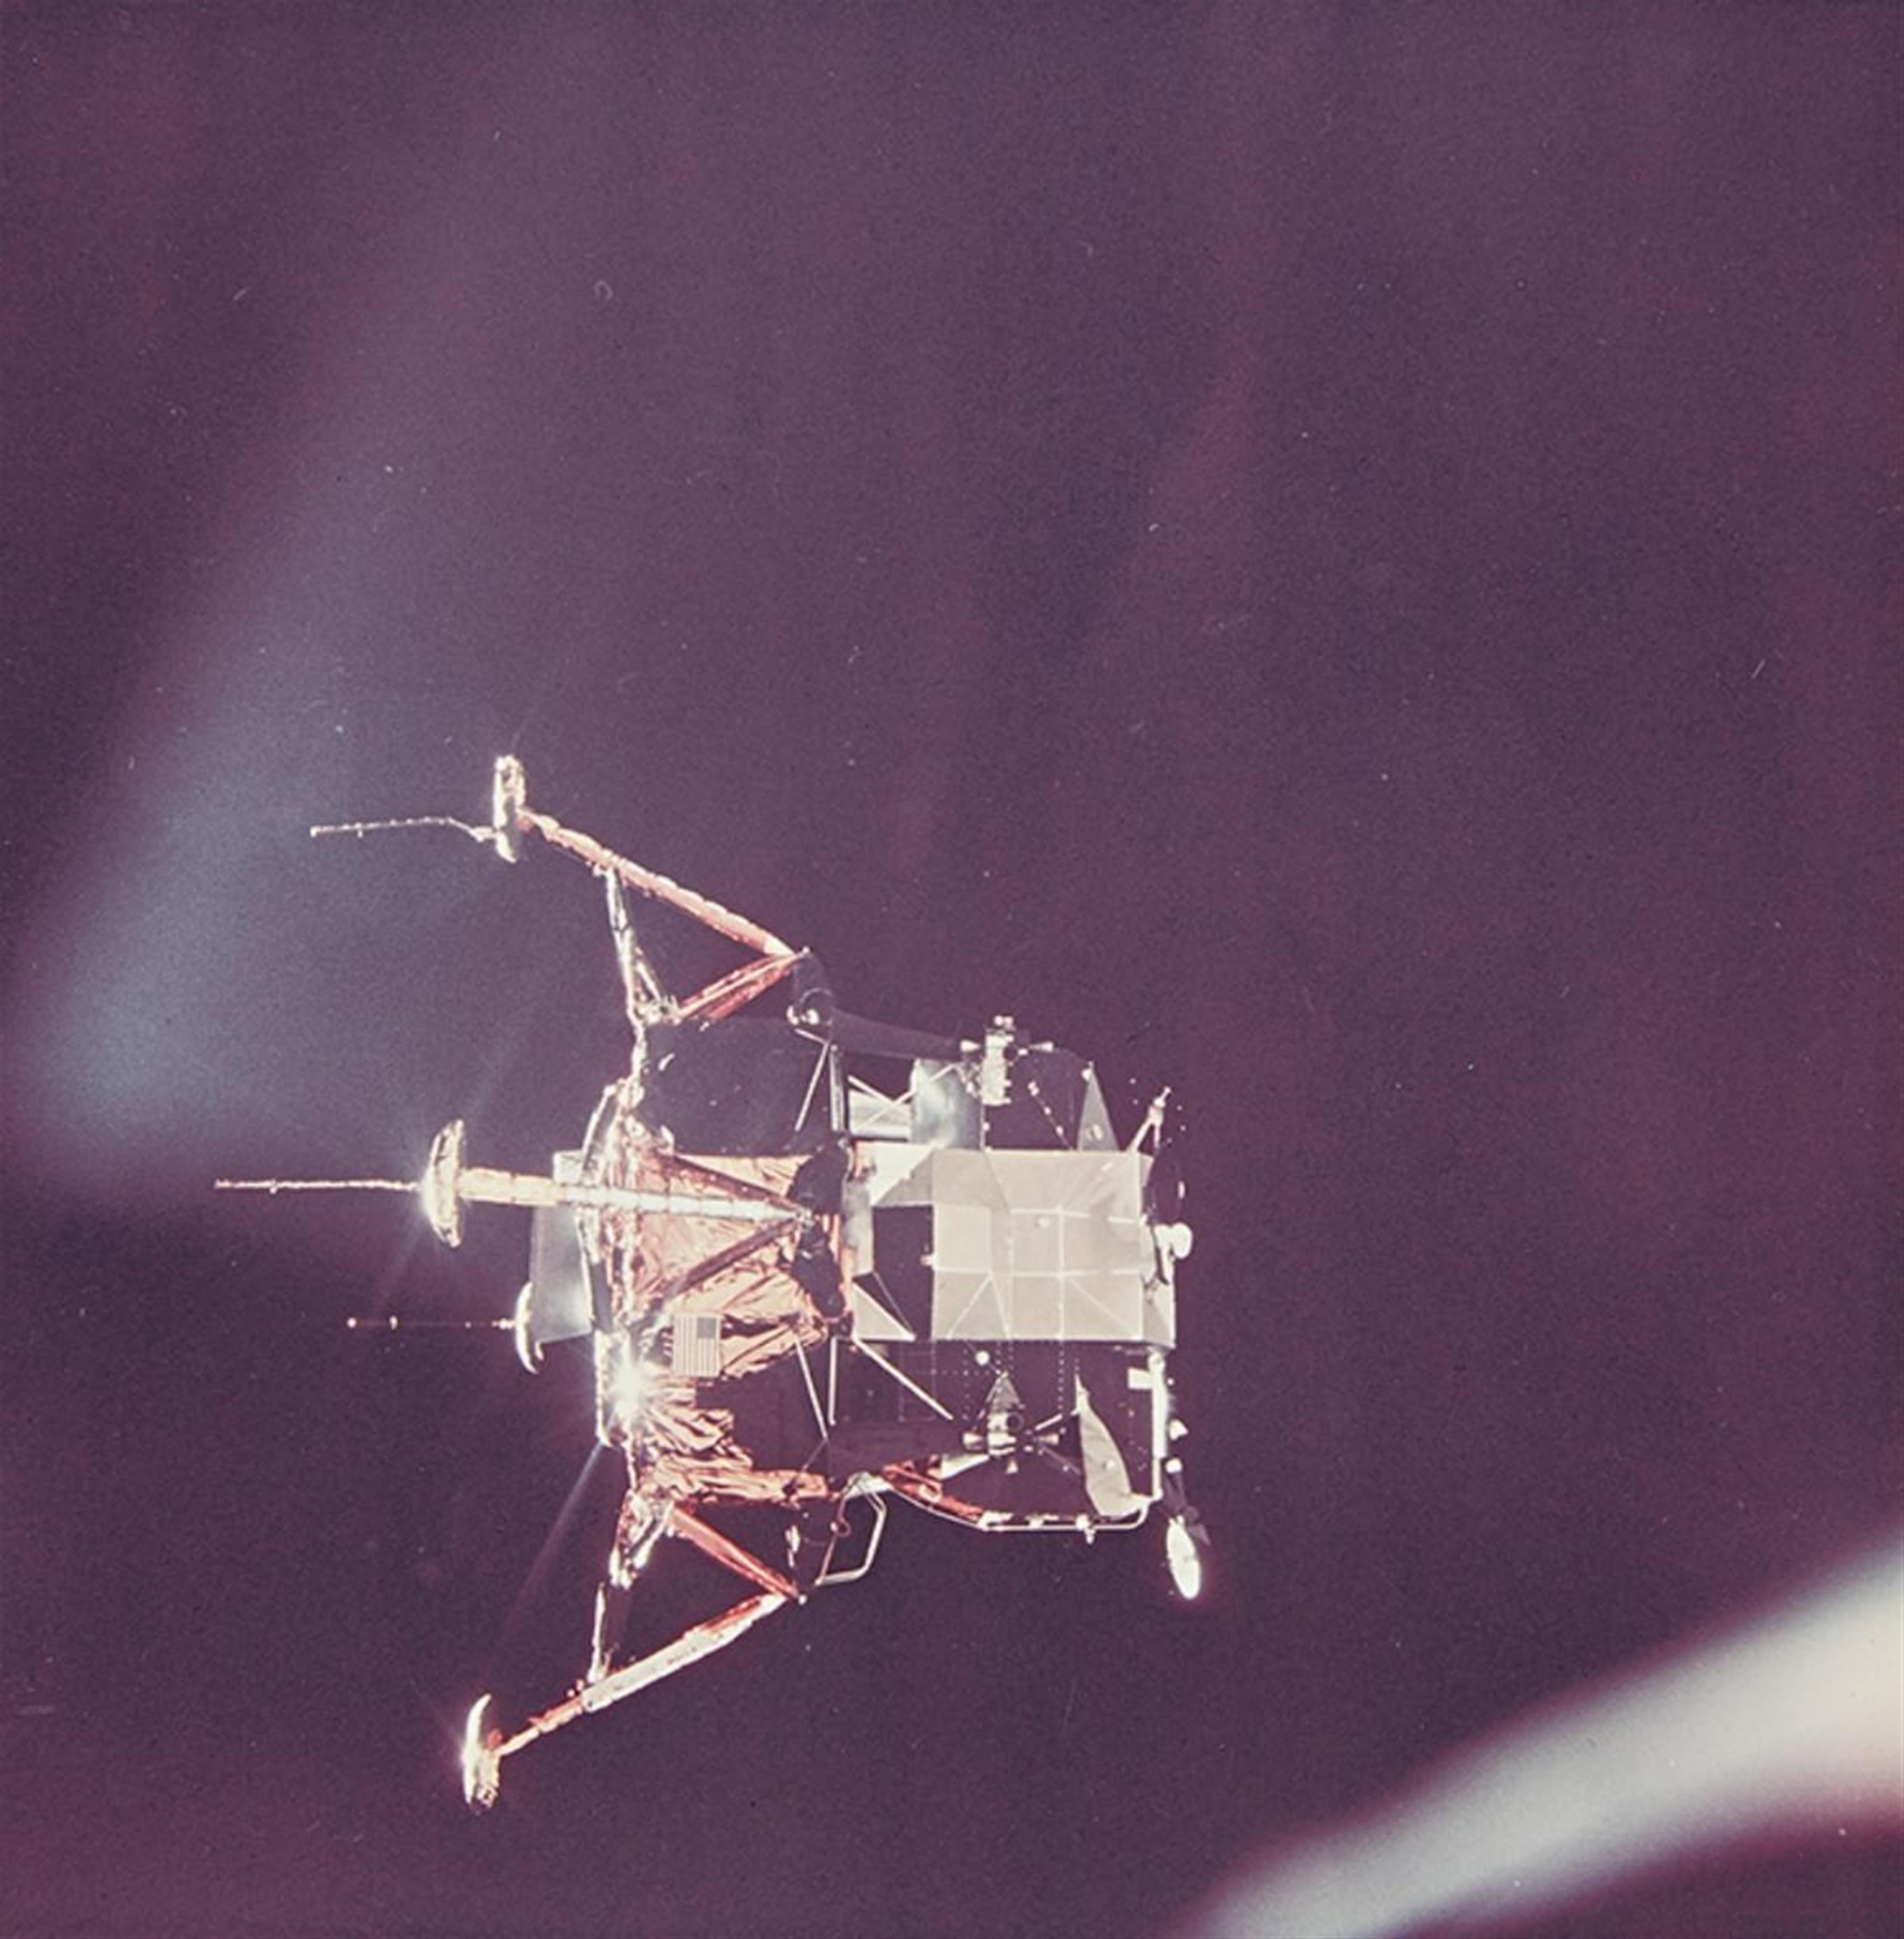 NASA - Lunar module viewed from the command and service modules, Apollo 11 - image-1